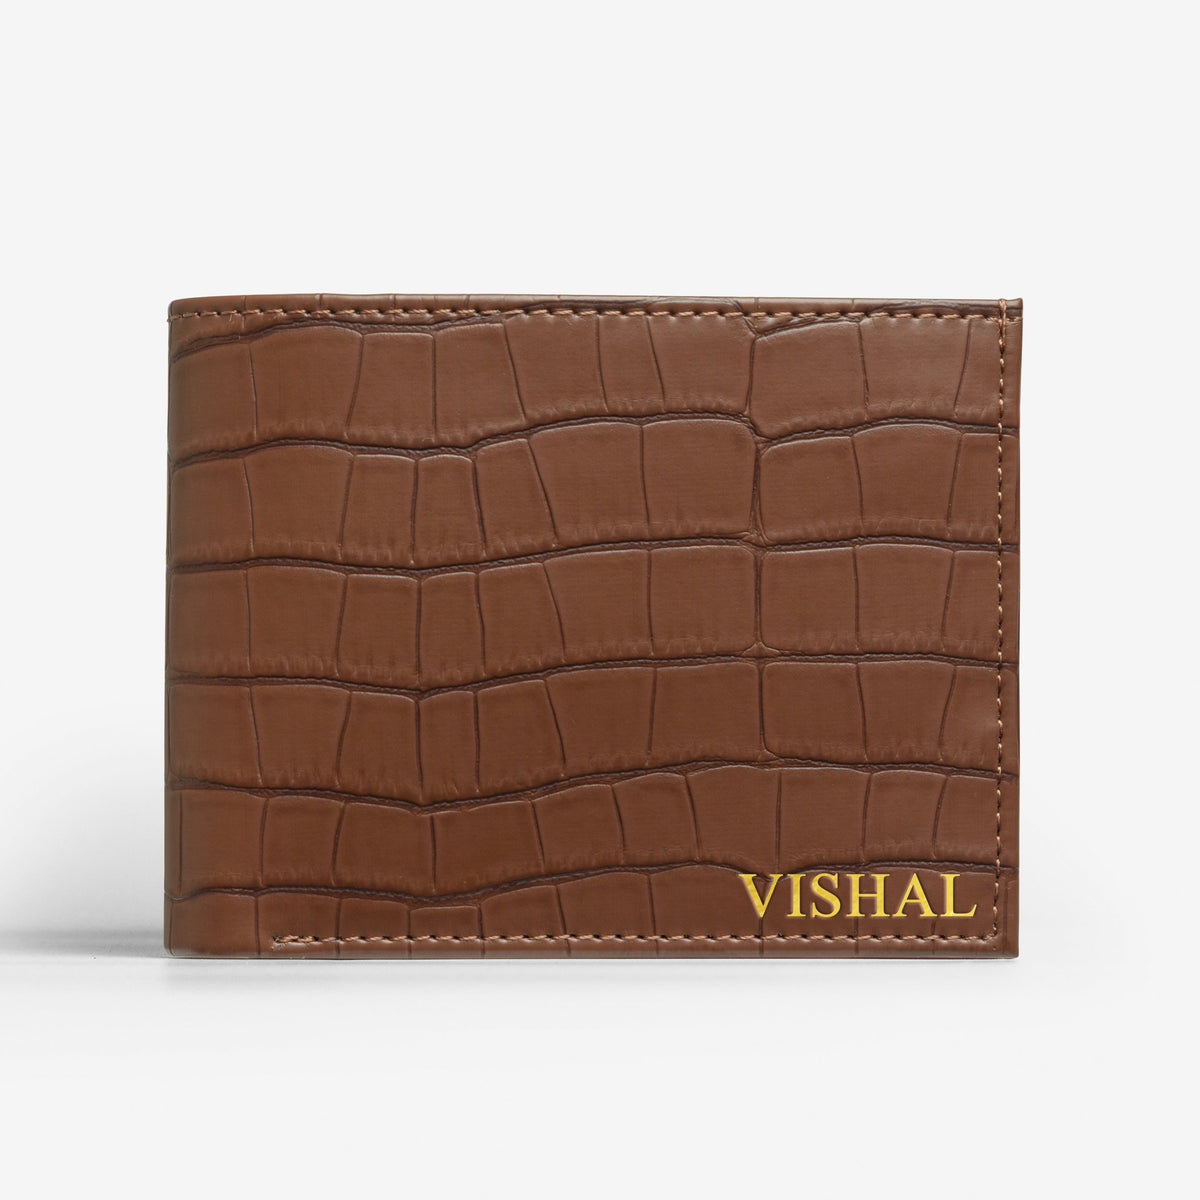 Are you into designer men's wallets? Check out this mens wallet